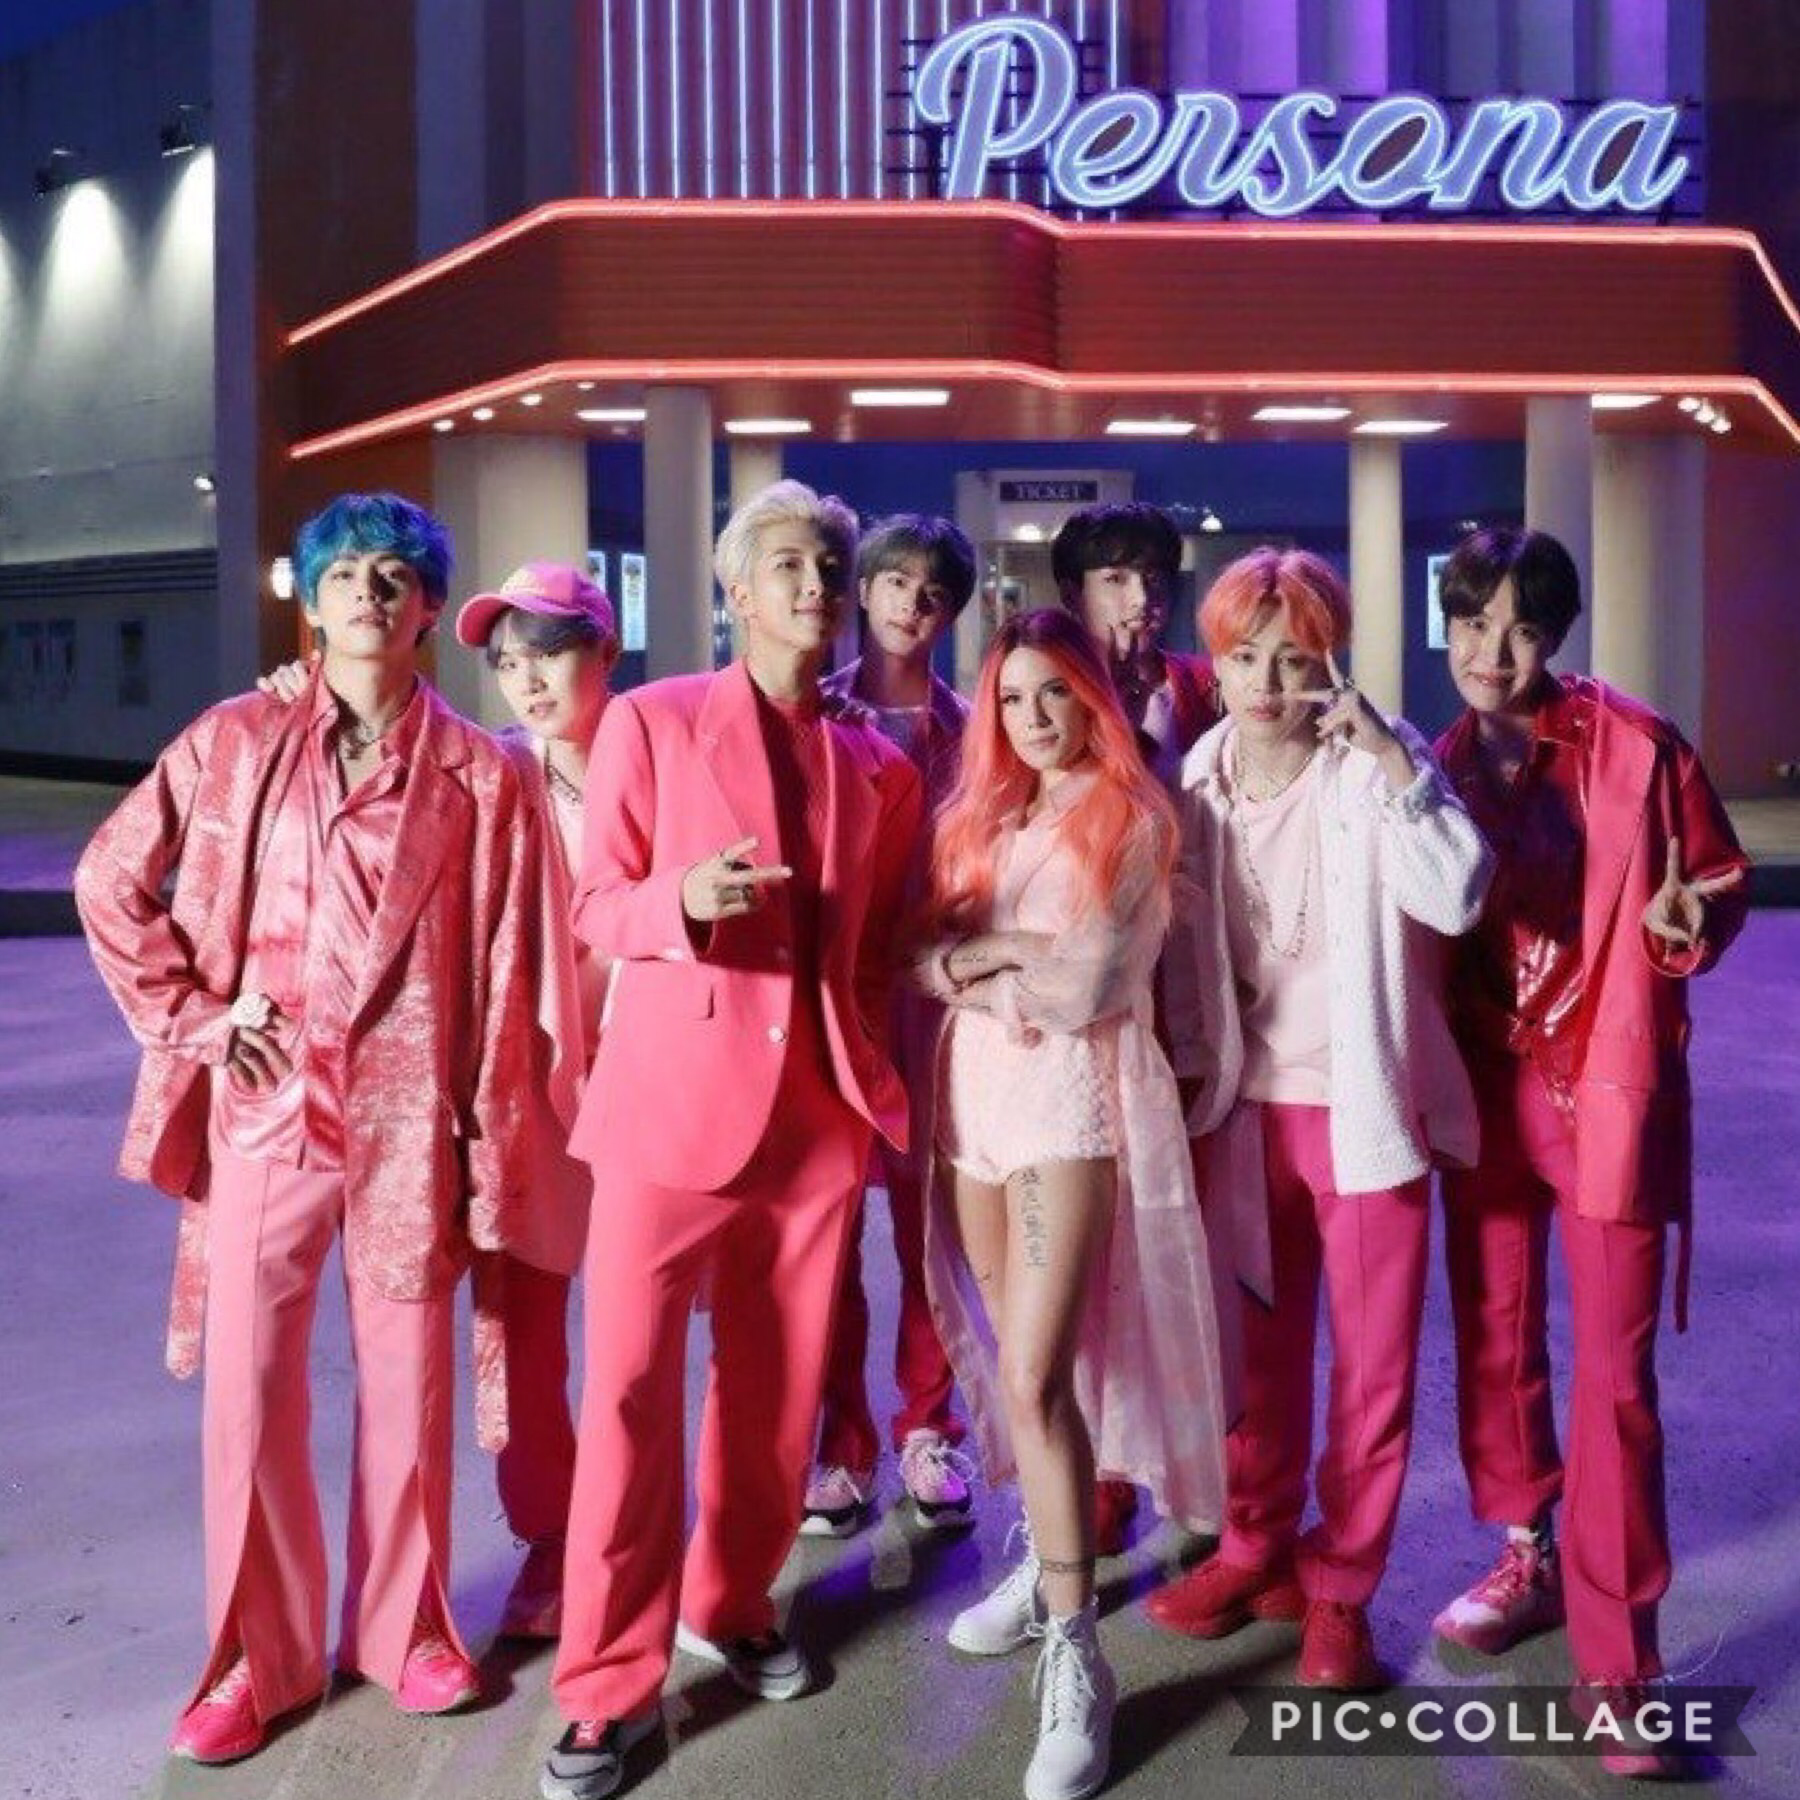 OOf boy with luv had me shook


The aesthetics, the vocals, the visuals, the rapping OOF-


Everything was perfect 



Stream boy with luv💕